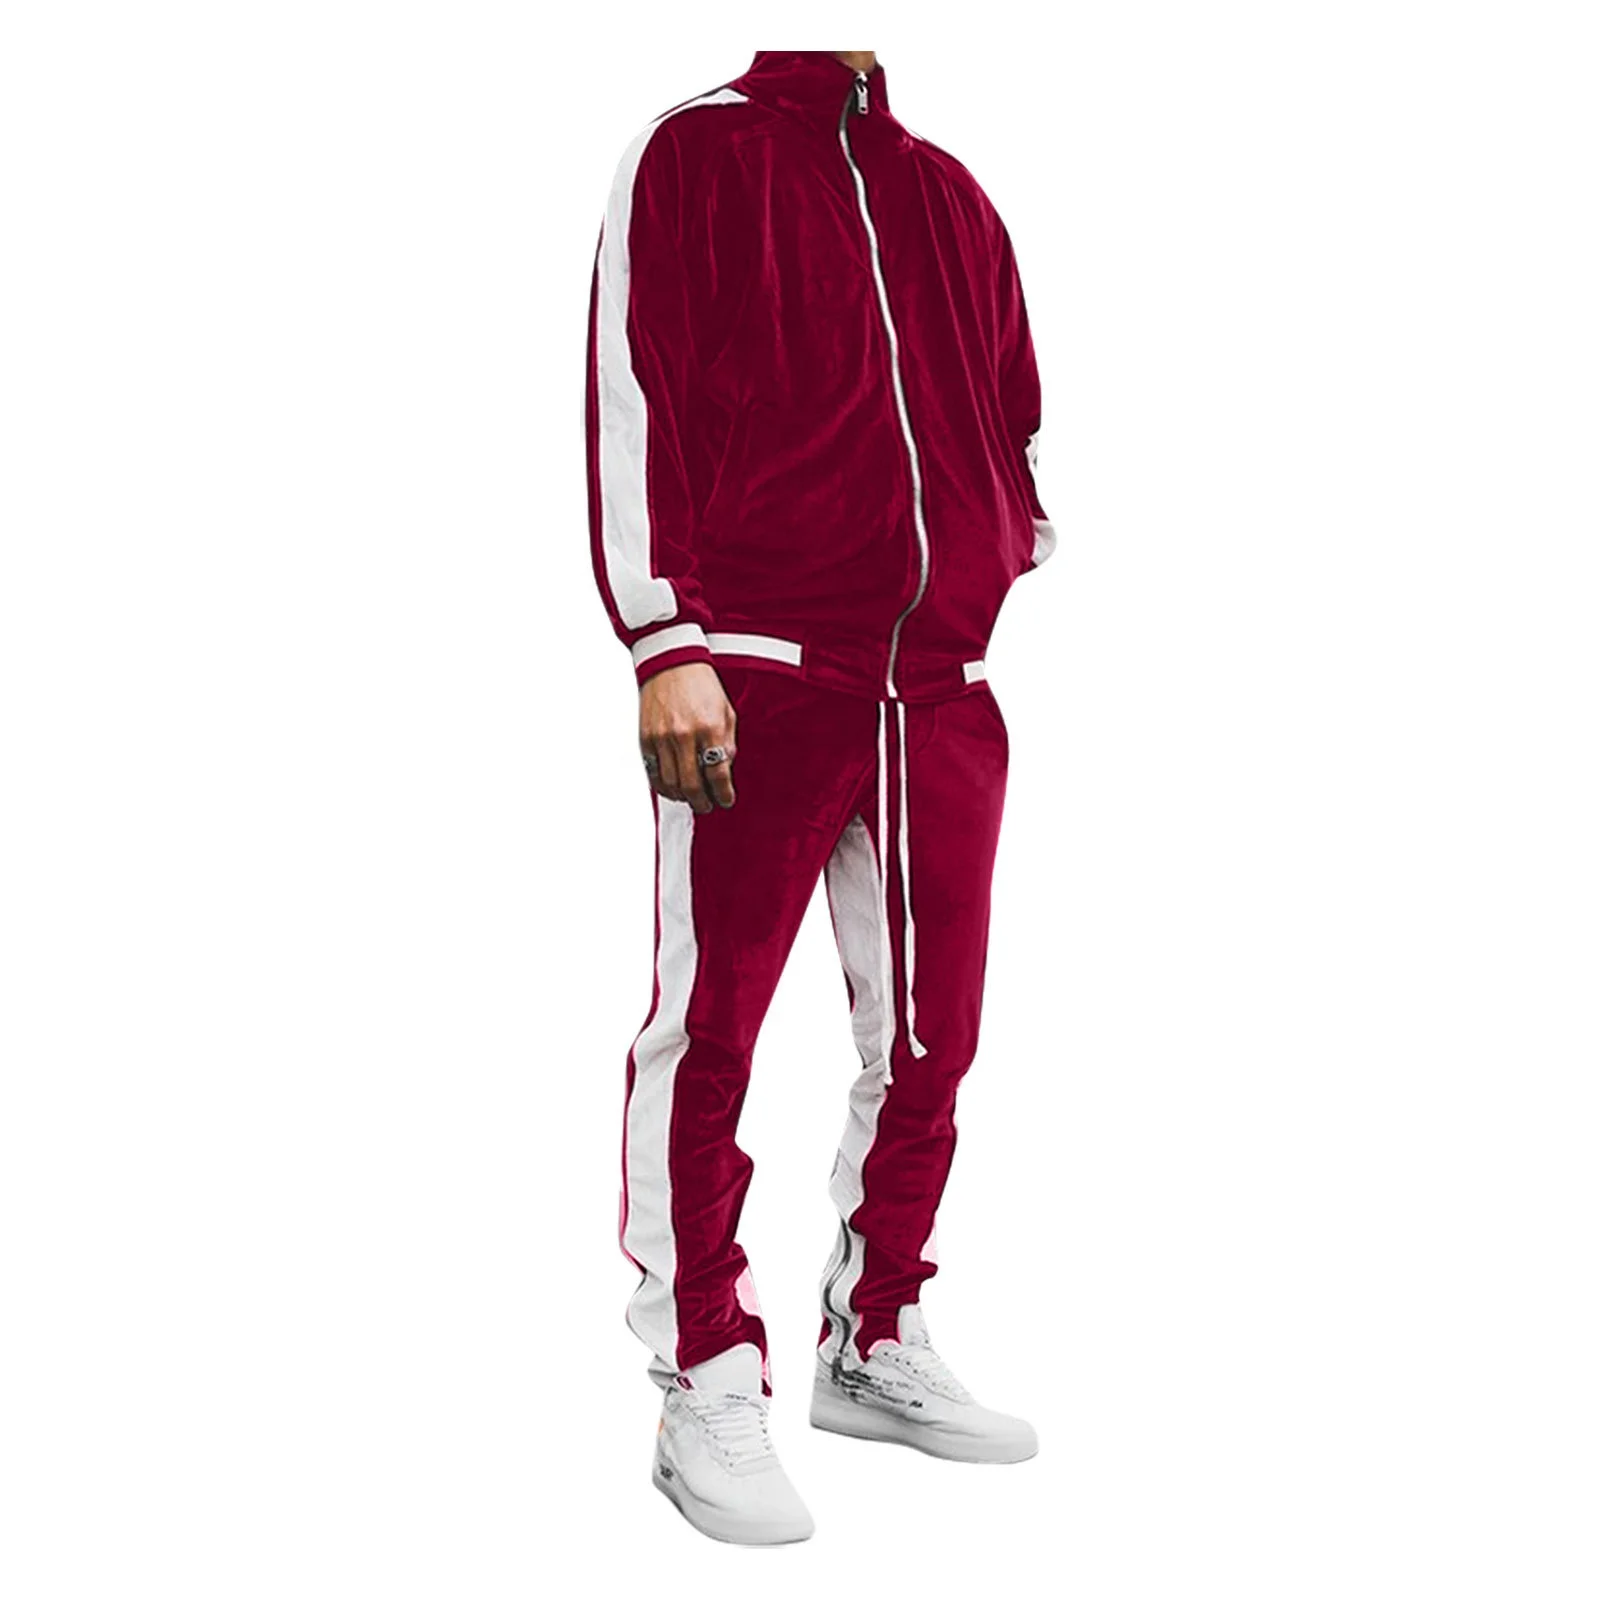 

LW 6666 New arrival best quality velvet velour tracksuits with zipper hoodie and jogger comfortable soft velvet tracksuit men, 2 colors available